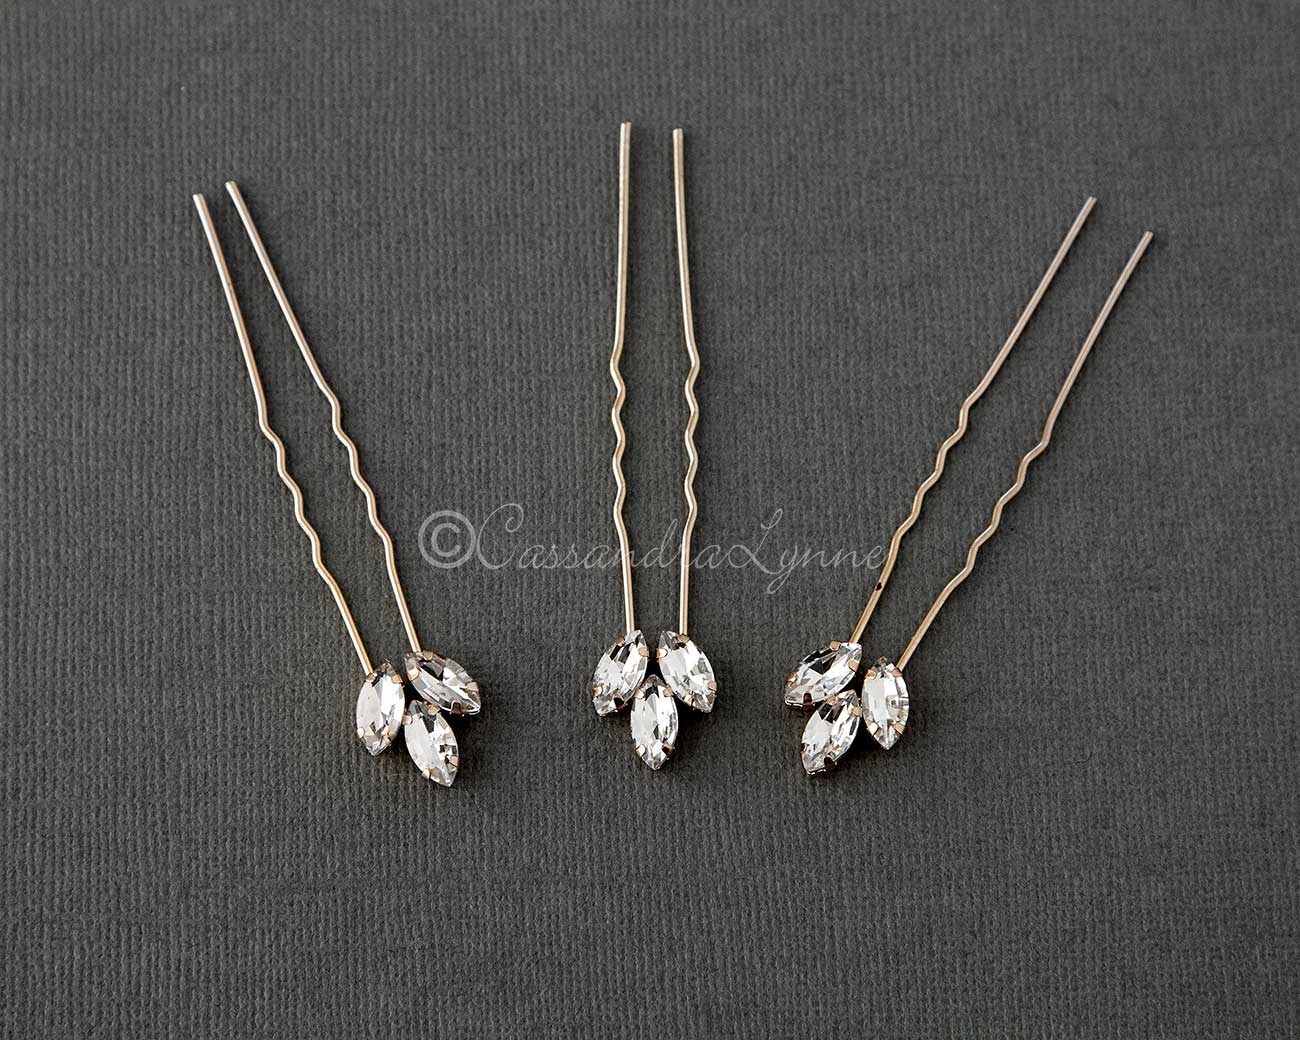 Marquise Wedding Hair Pins Set in Gold